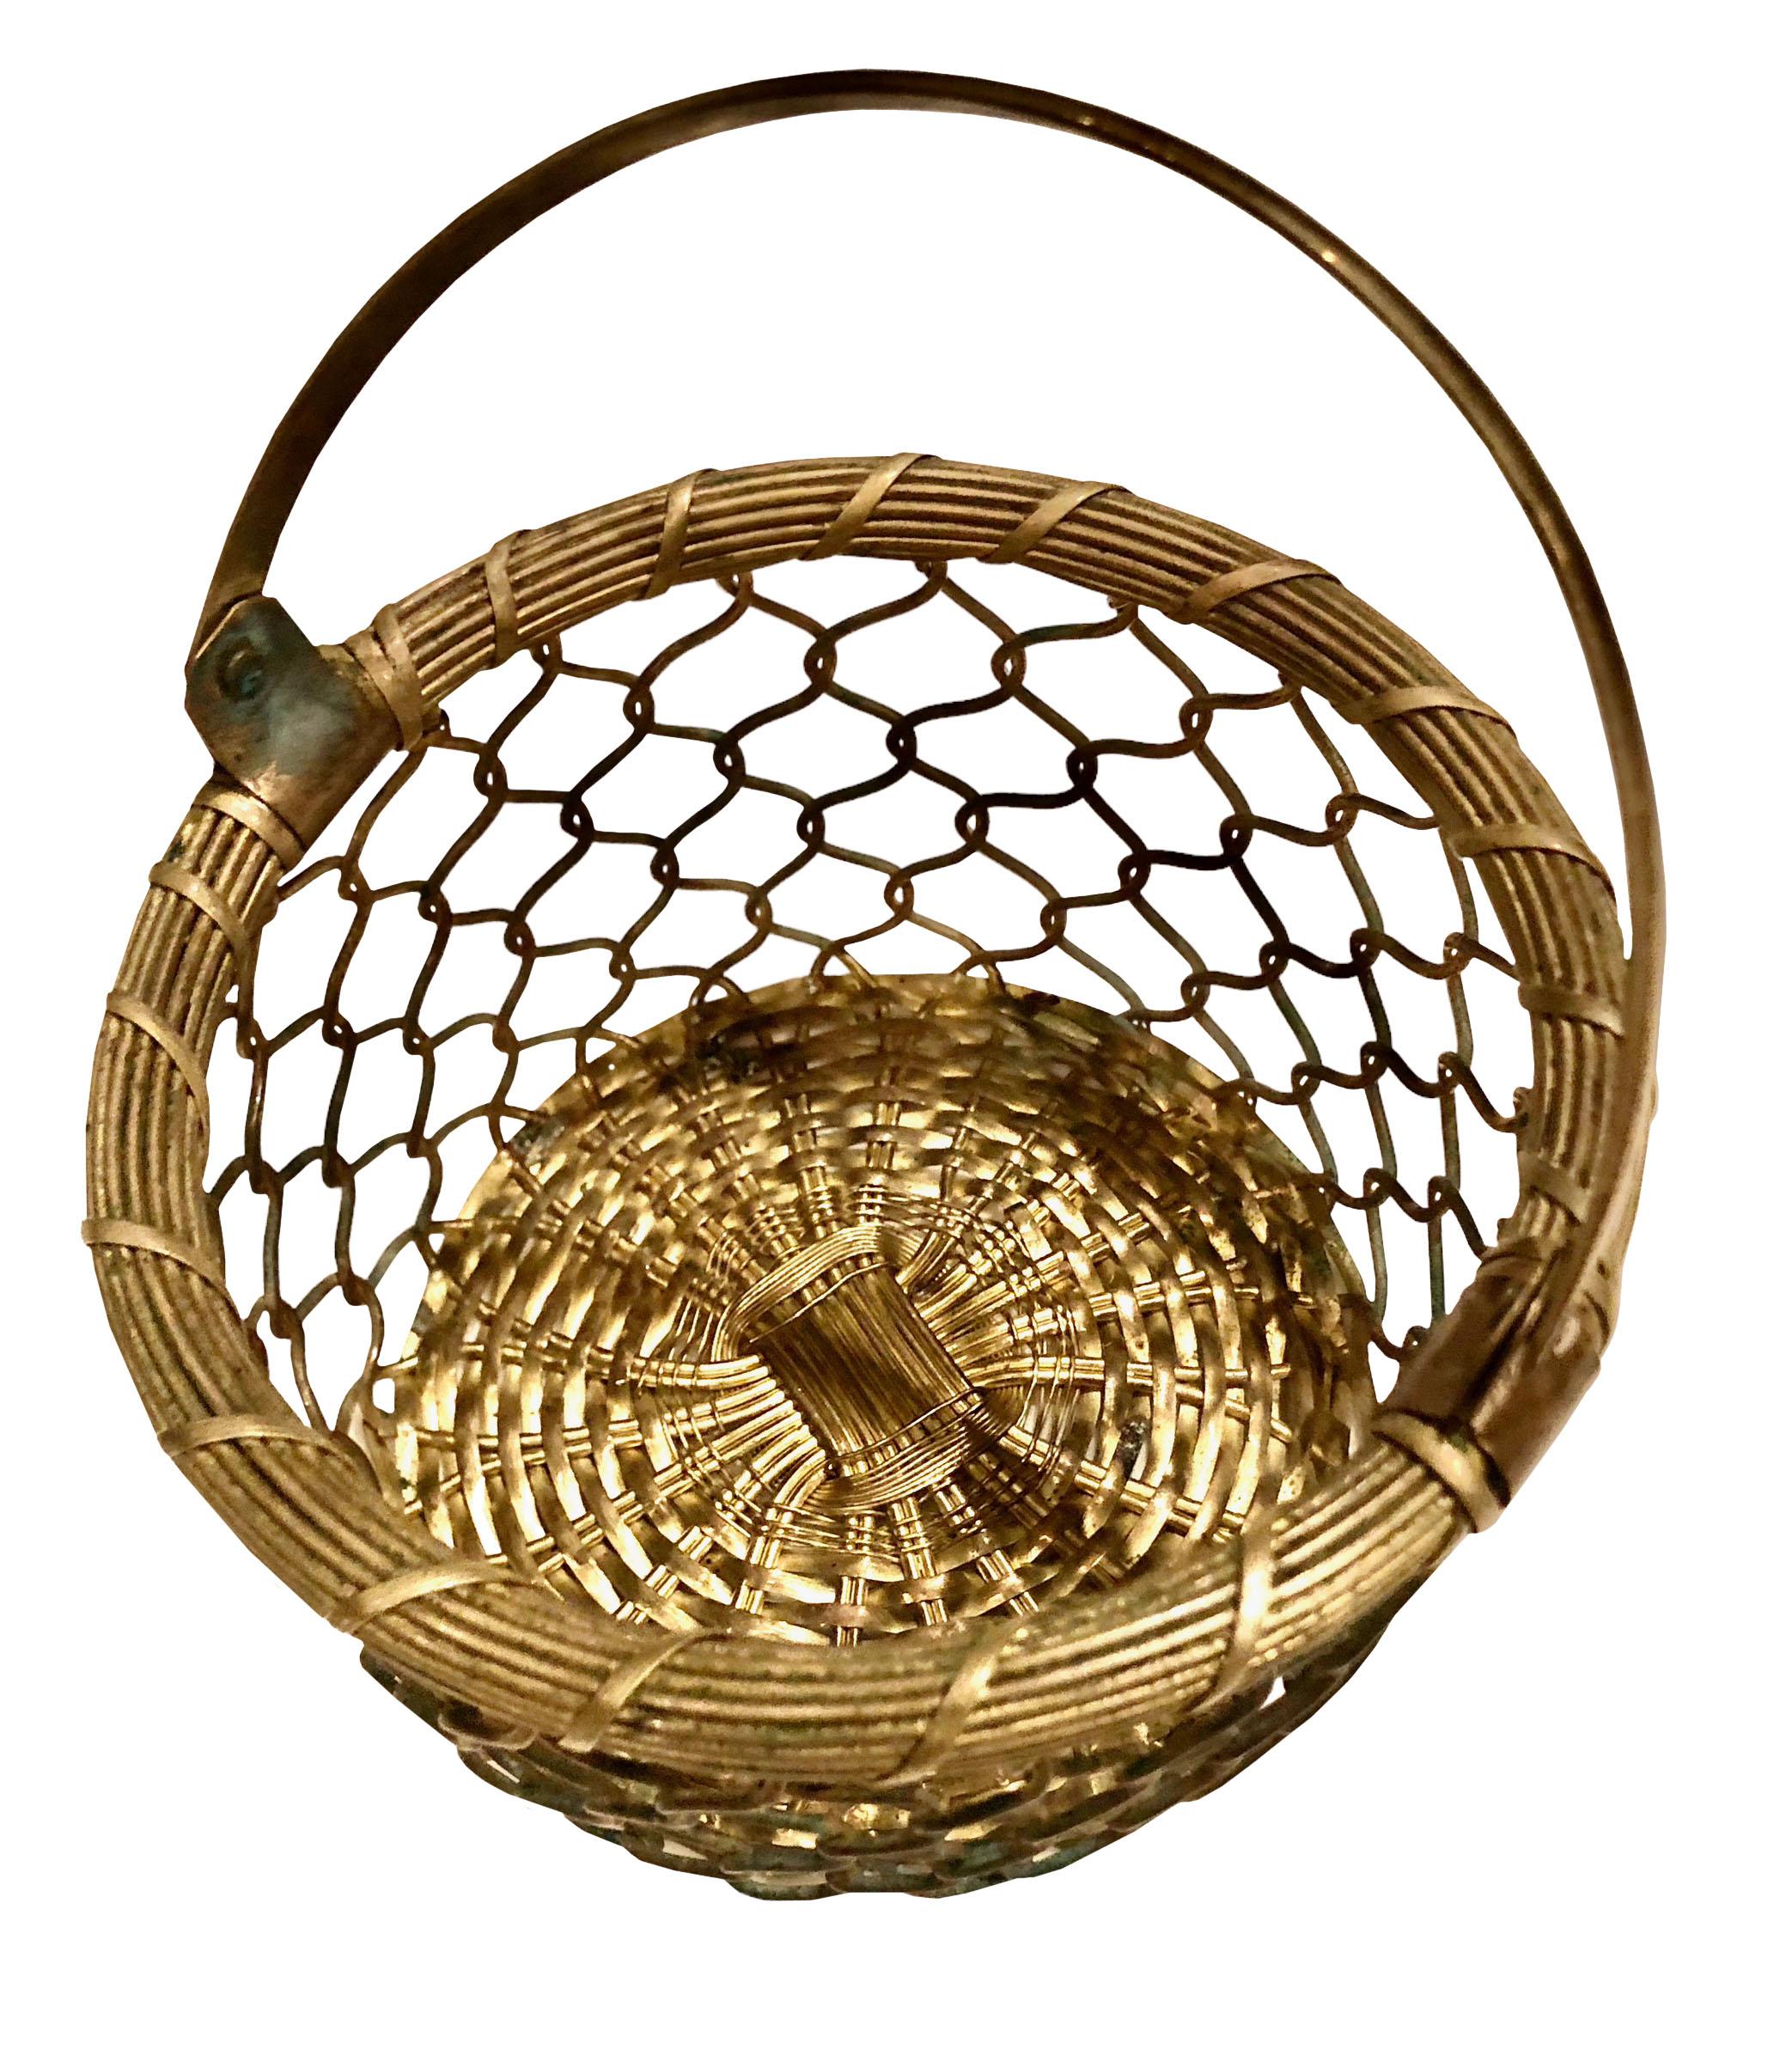 A lovely antique solid bronze basket from France. Will display beautifully among holiday table decor or as a stand alone piece. Circa 19th century.  The basket is three and a half inches deep. 
